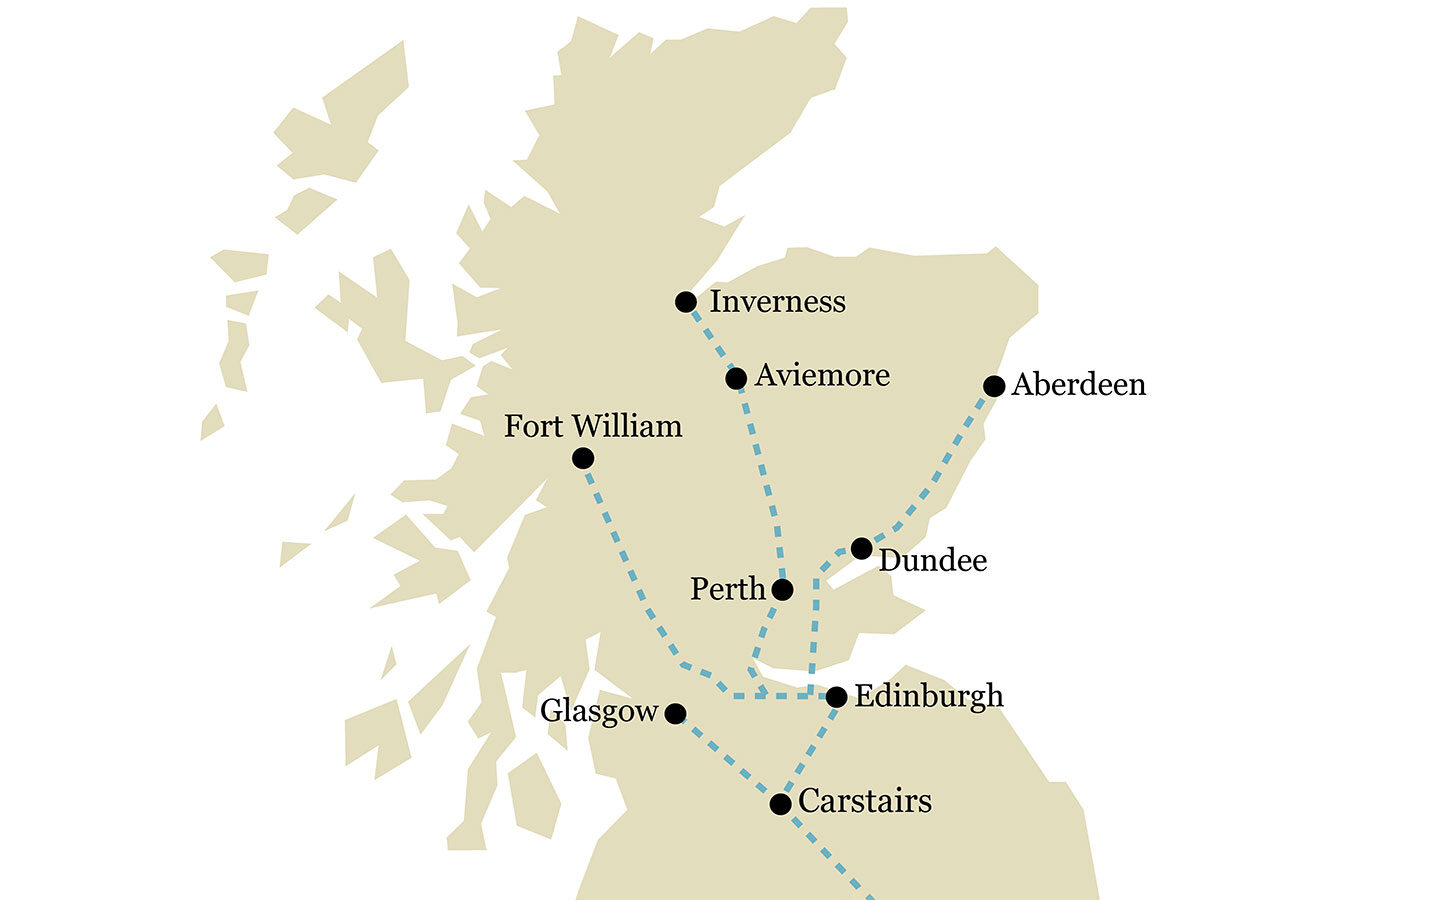 Caledonian Sleeper route map